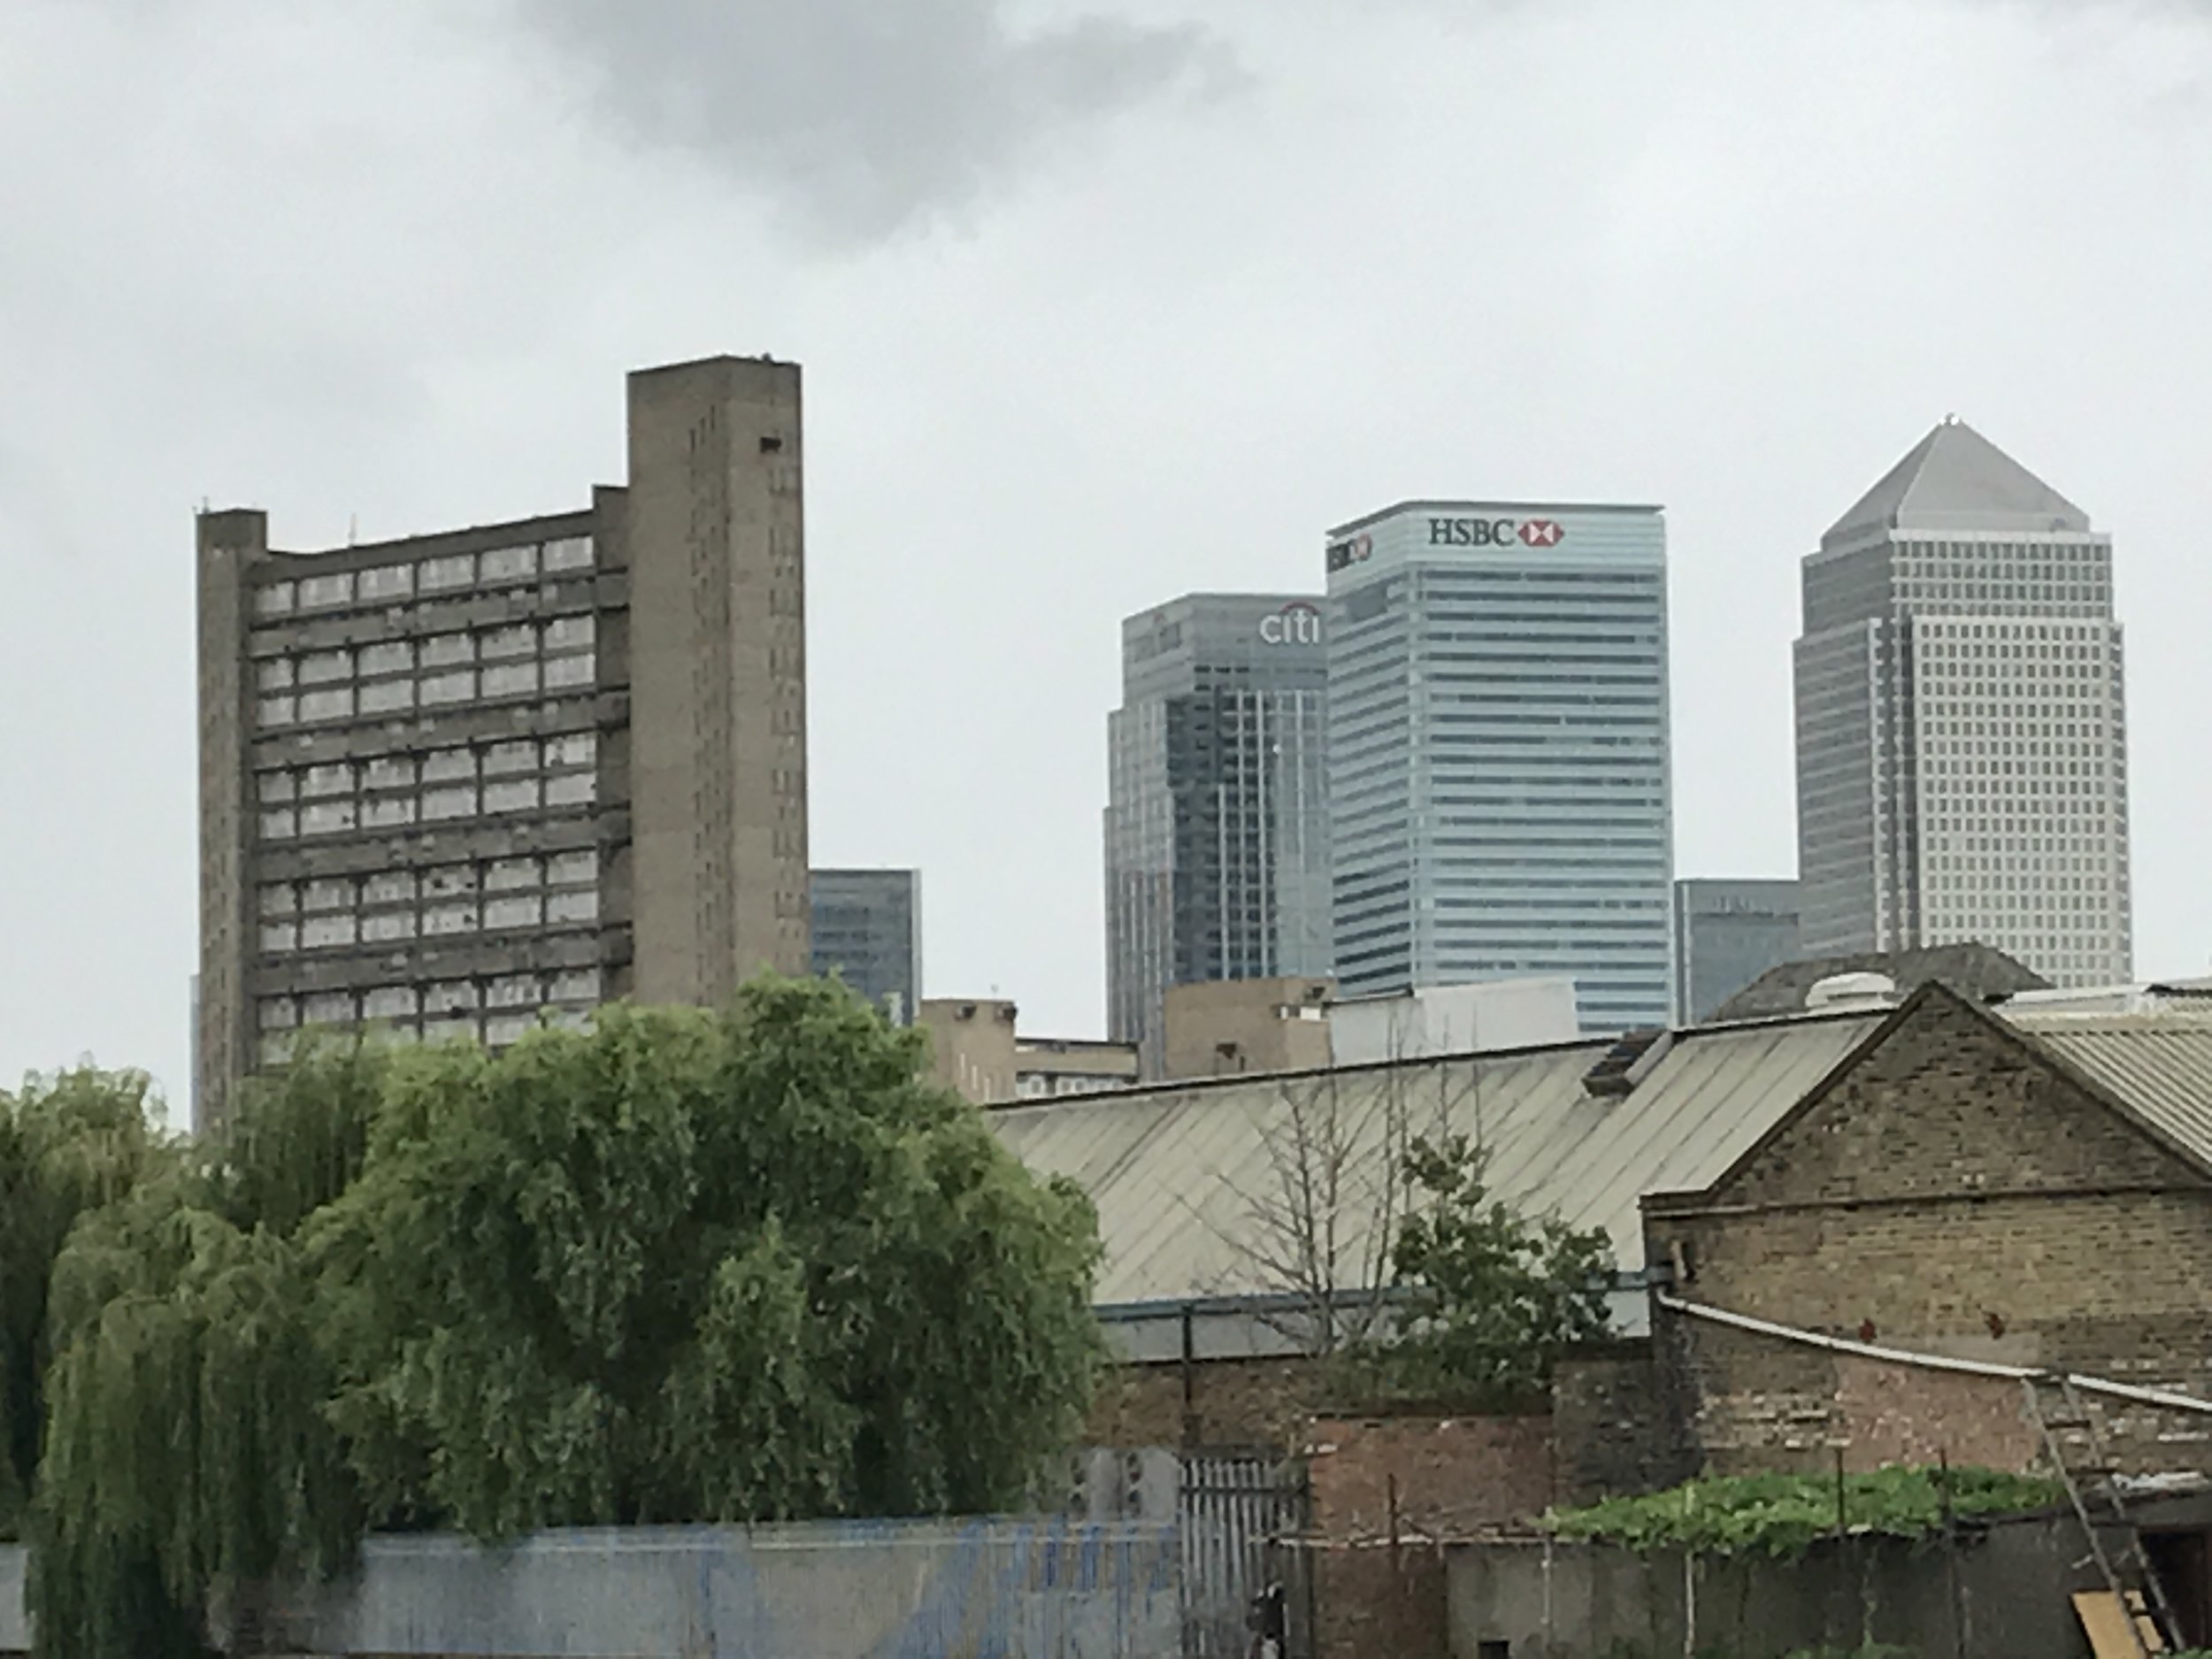 Balfron Tower and the City from the west bank of the River Lea